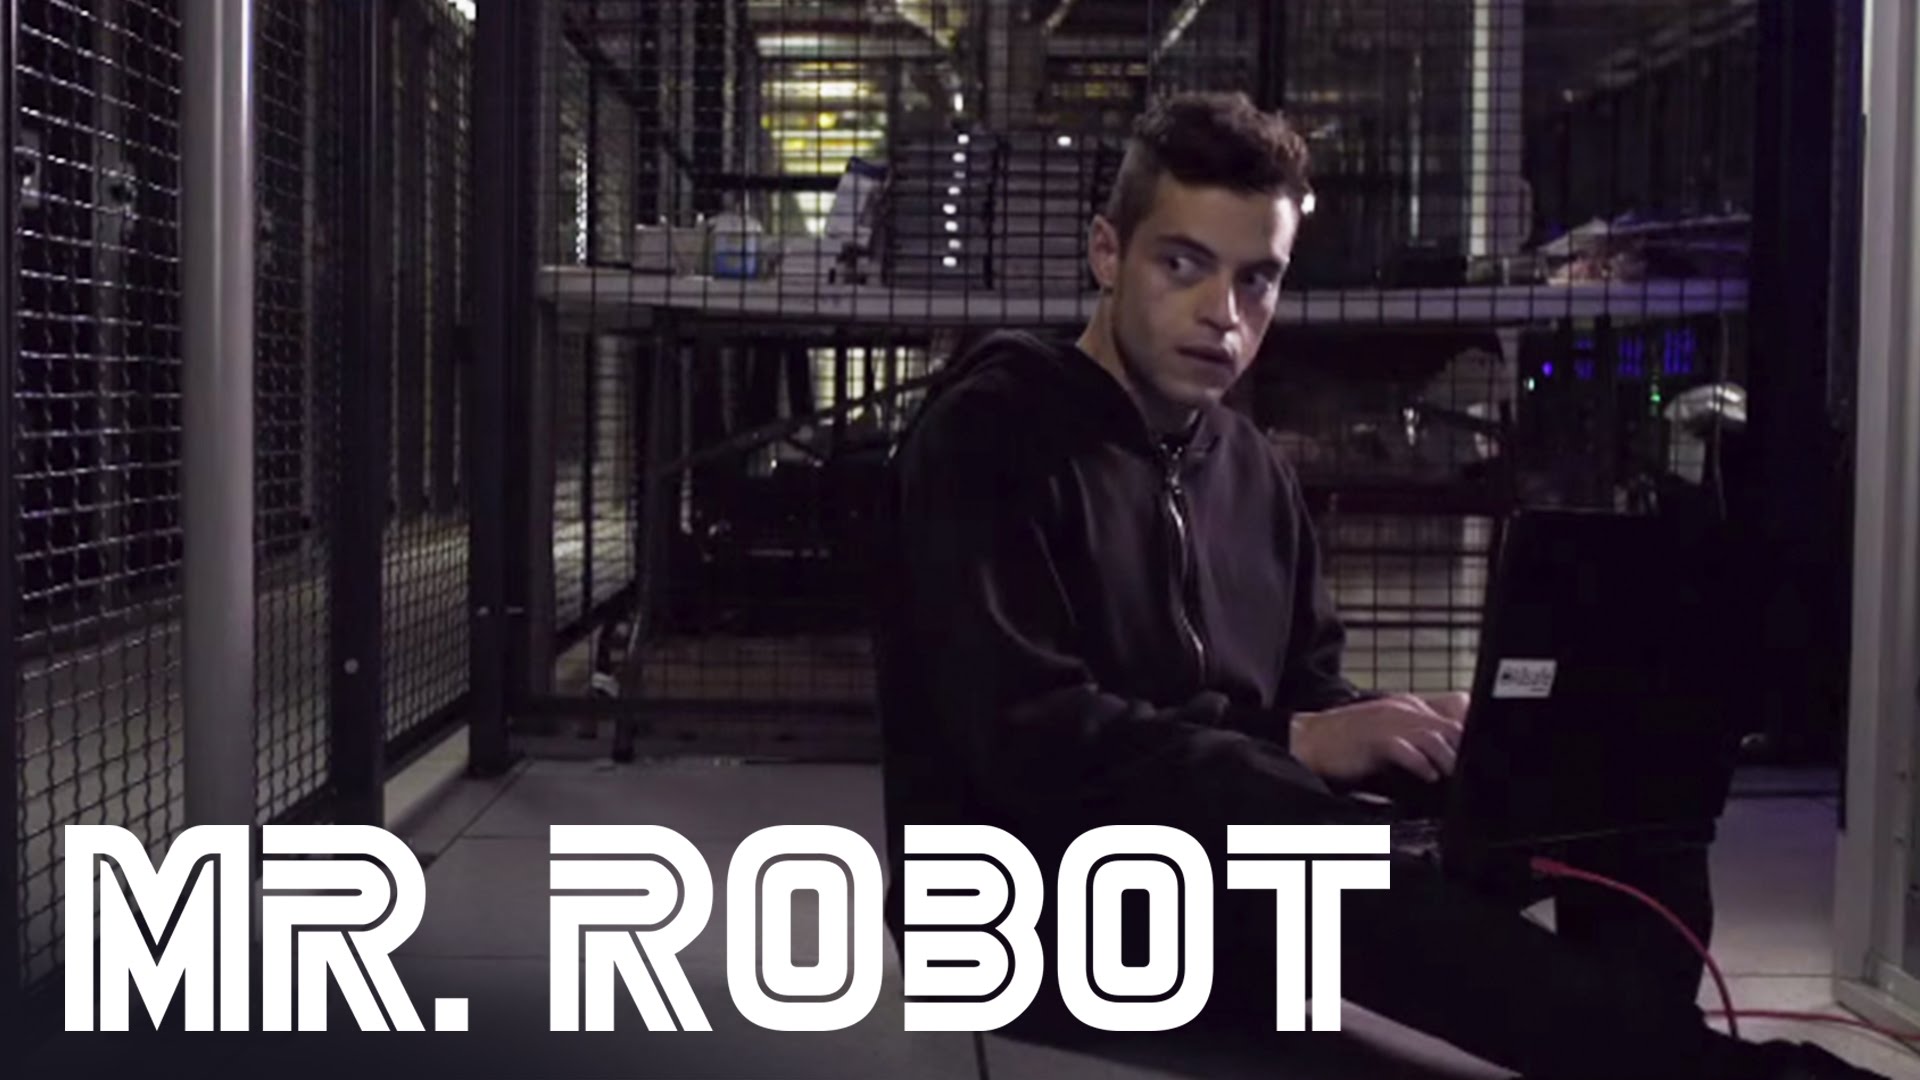 Mr Robot Wallpaper Stock Pictures qruq10by Yoanu 1920x1080